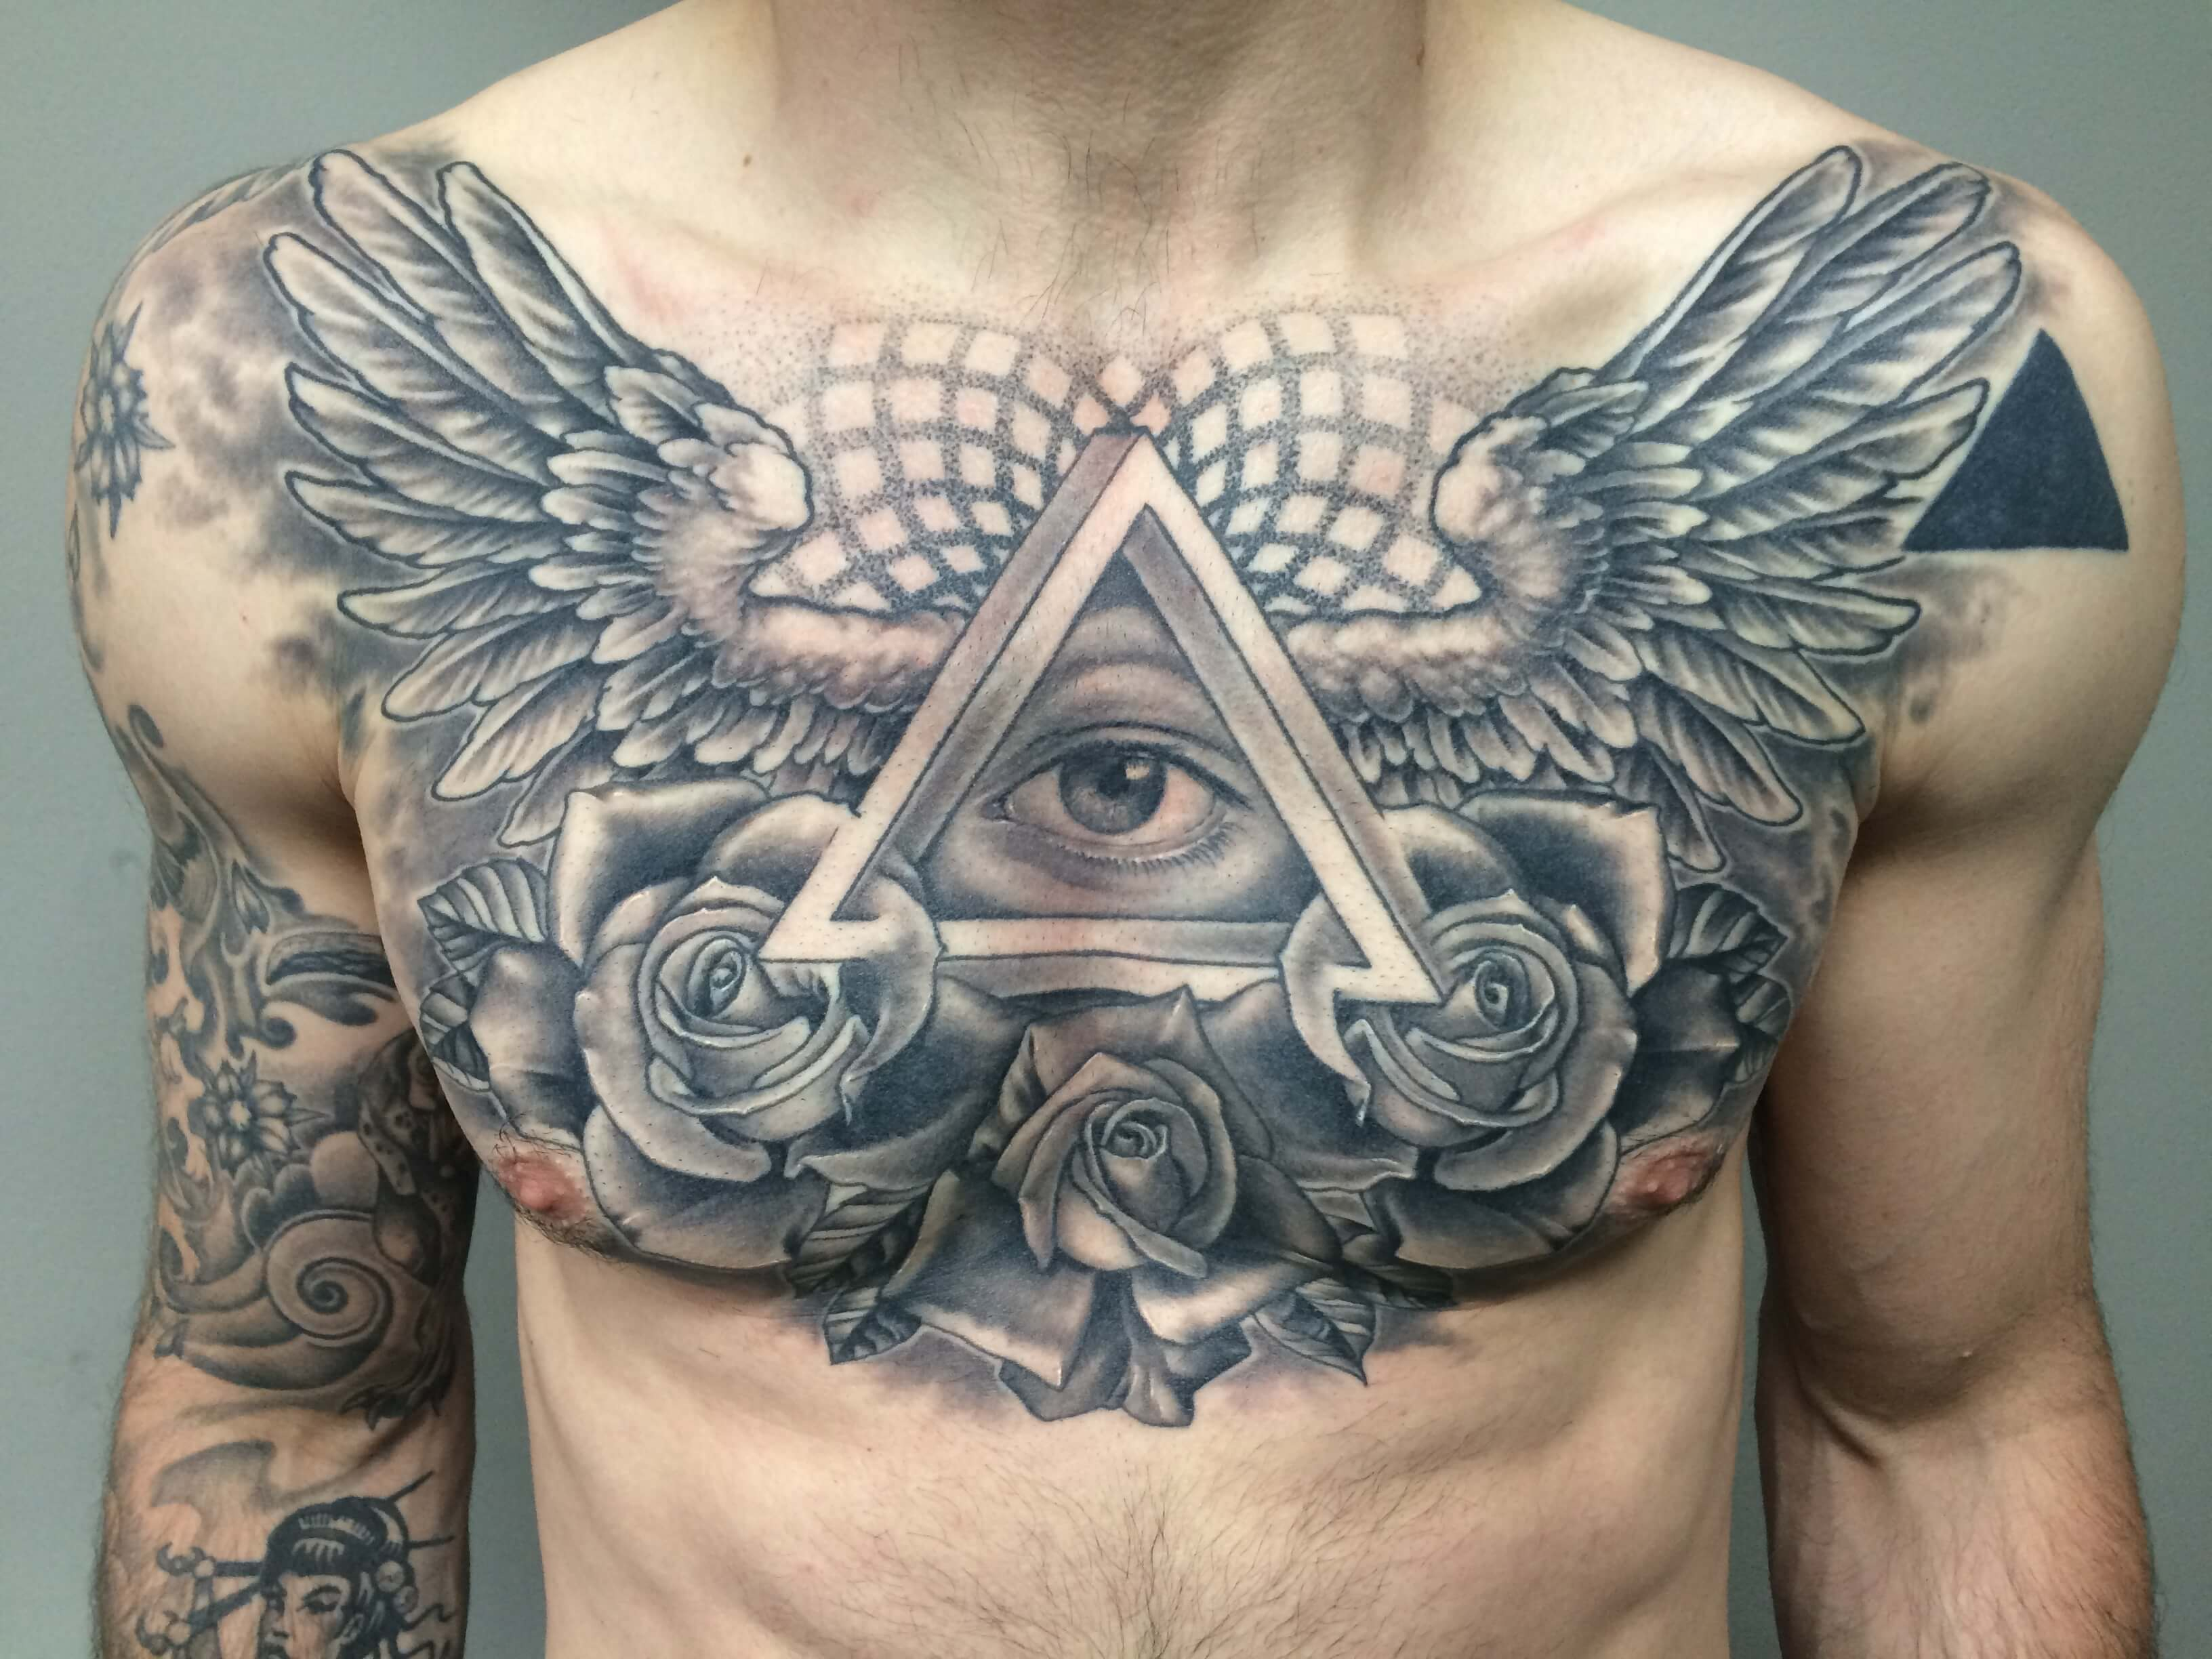 The 100 Best Chest Tattoos For Men Improb with dimensions 3264 X 2448